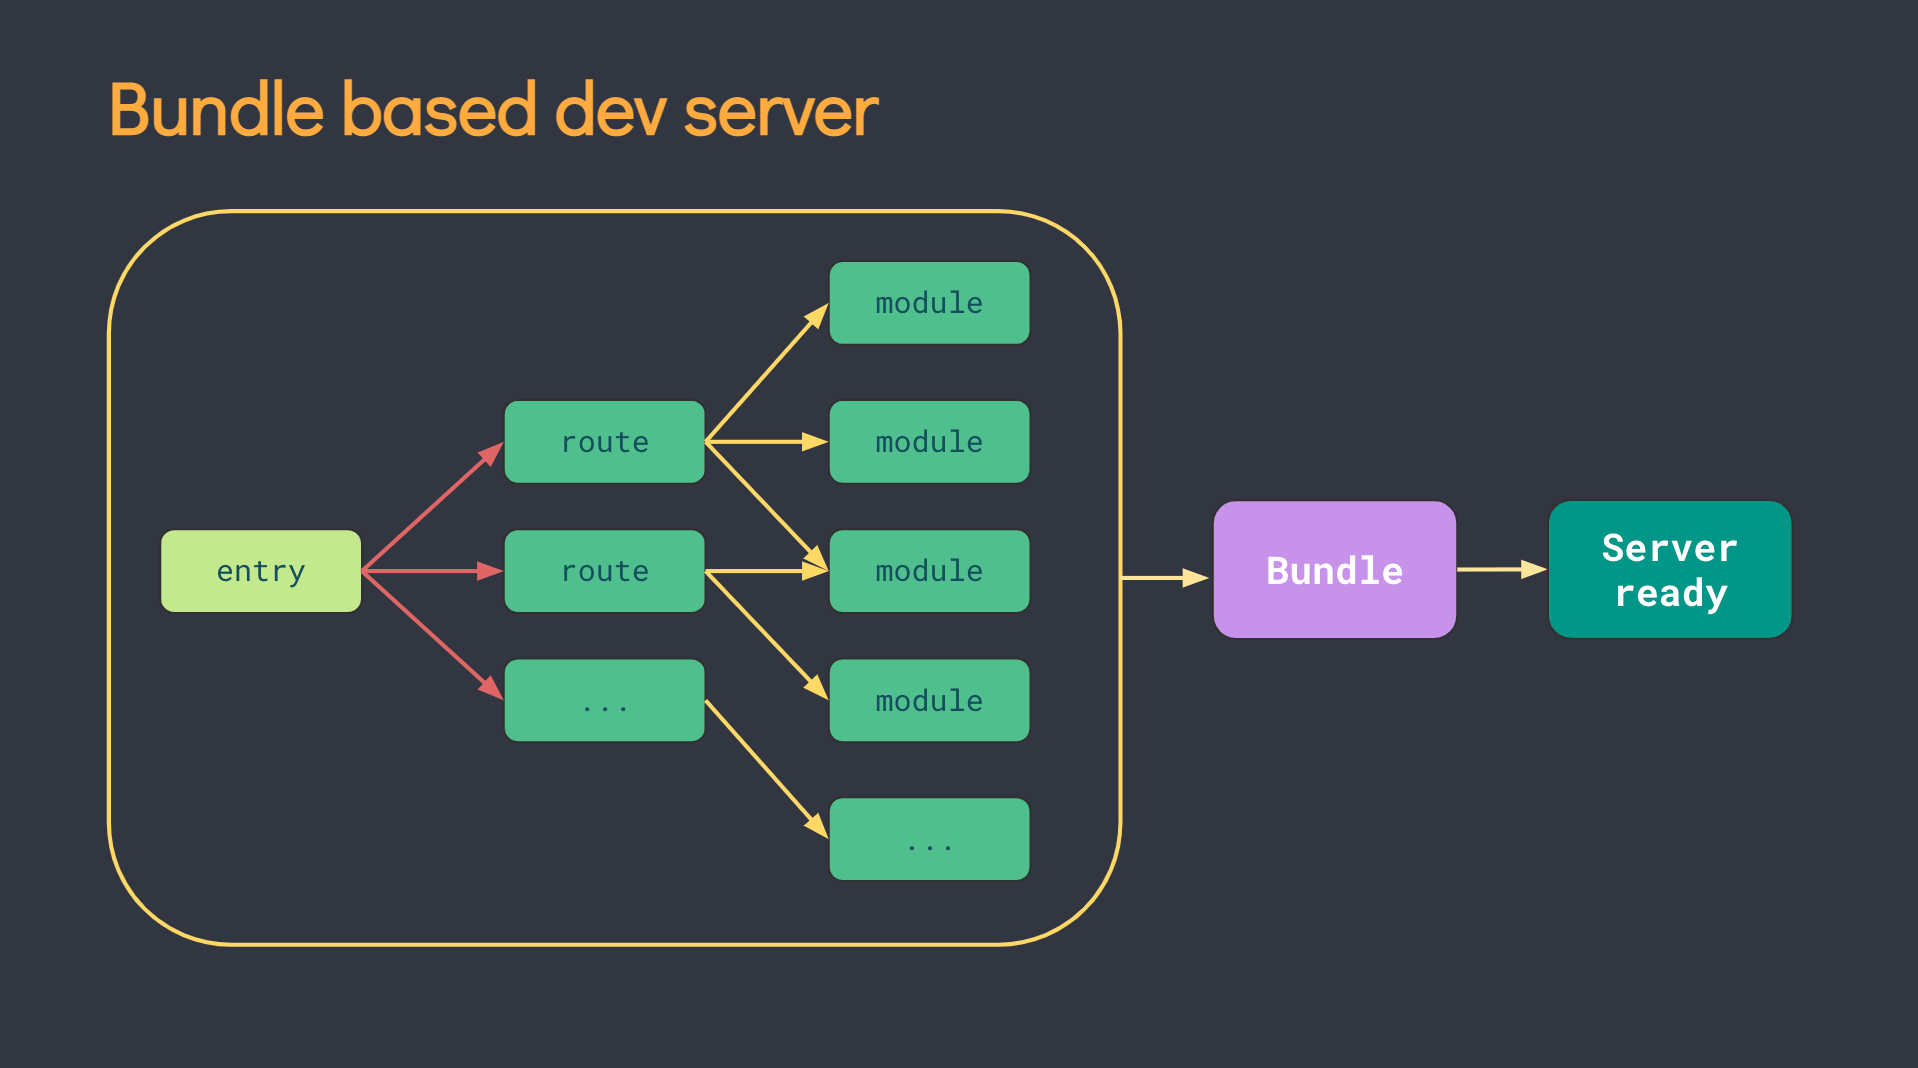 Bundle-based dev server diagram shows Entry > multiple routes > multiple modules, then all that going to a bundle, going to server-ready